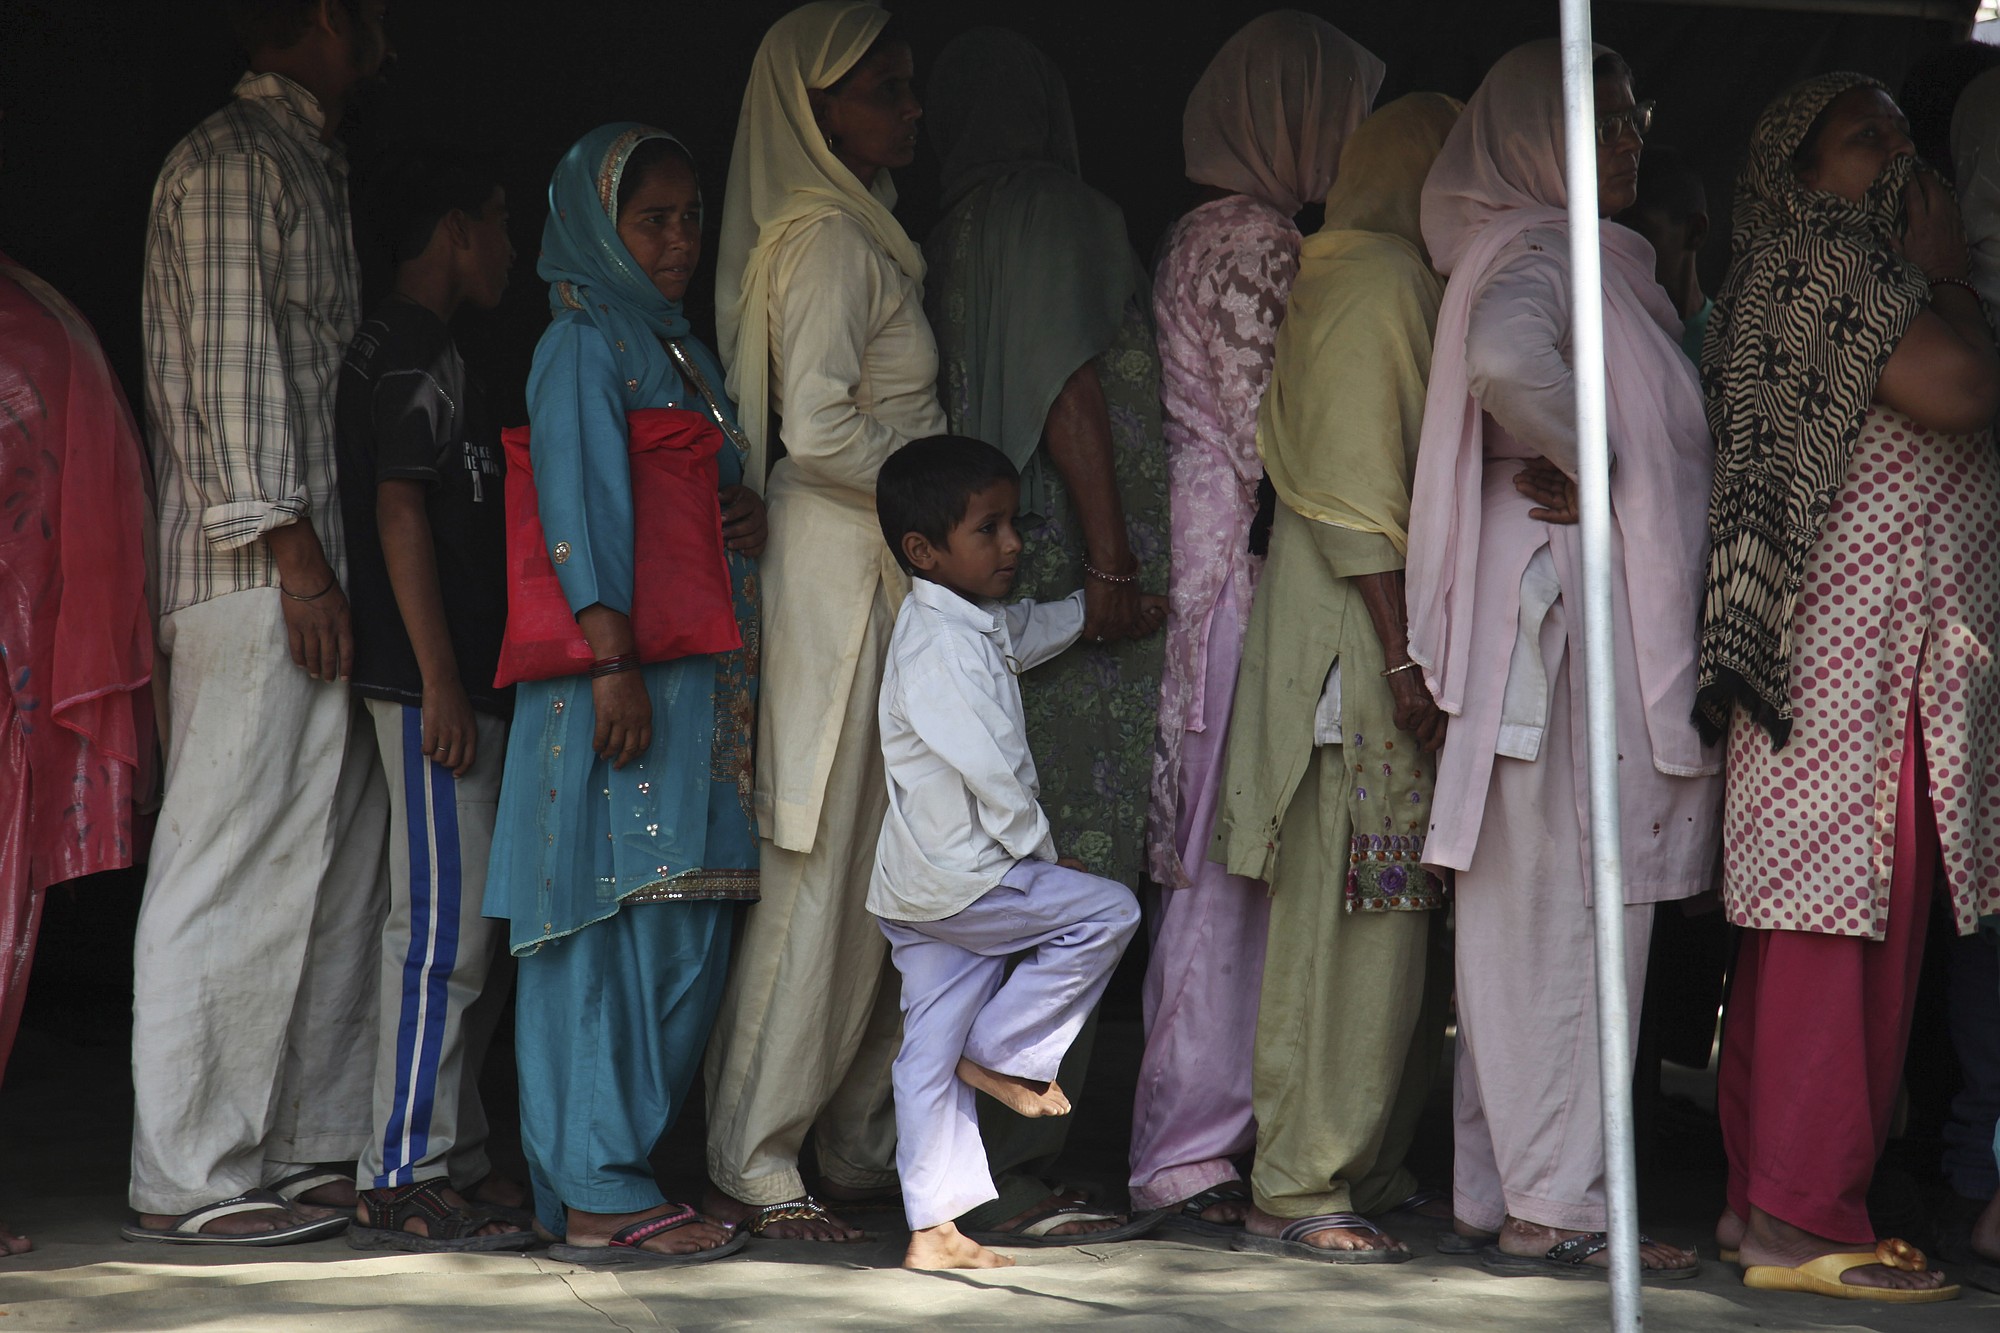 Indian villagers who fled from their homes near the Pakistan border line up for a medical check up at an army relief camp at Deoli village, in Arnia sector of Jammu and Kashmir state, India, on Thursday.